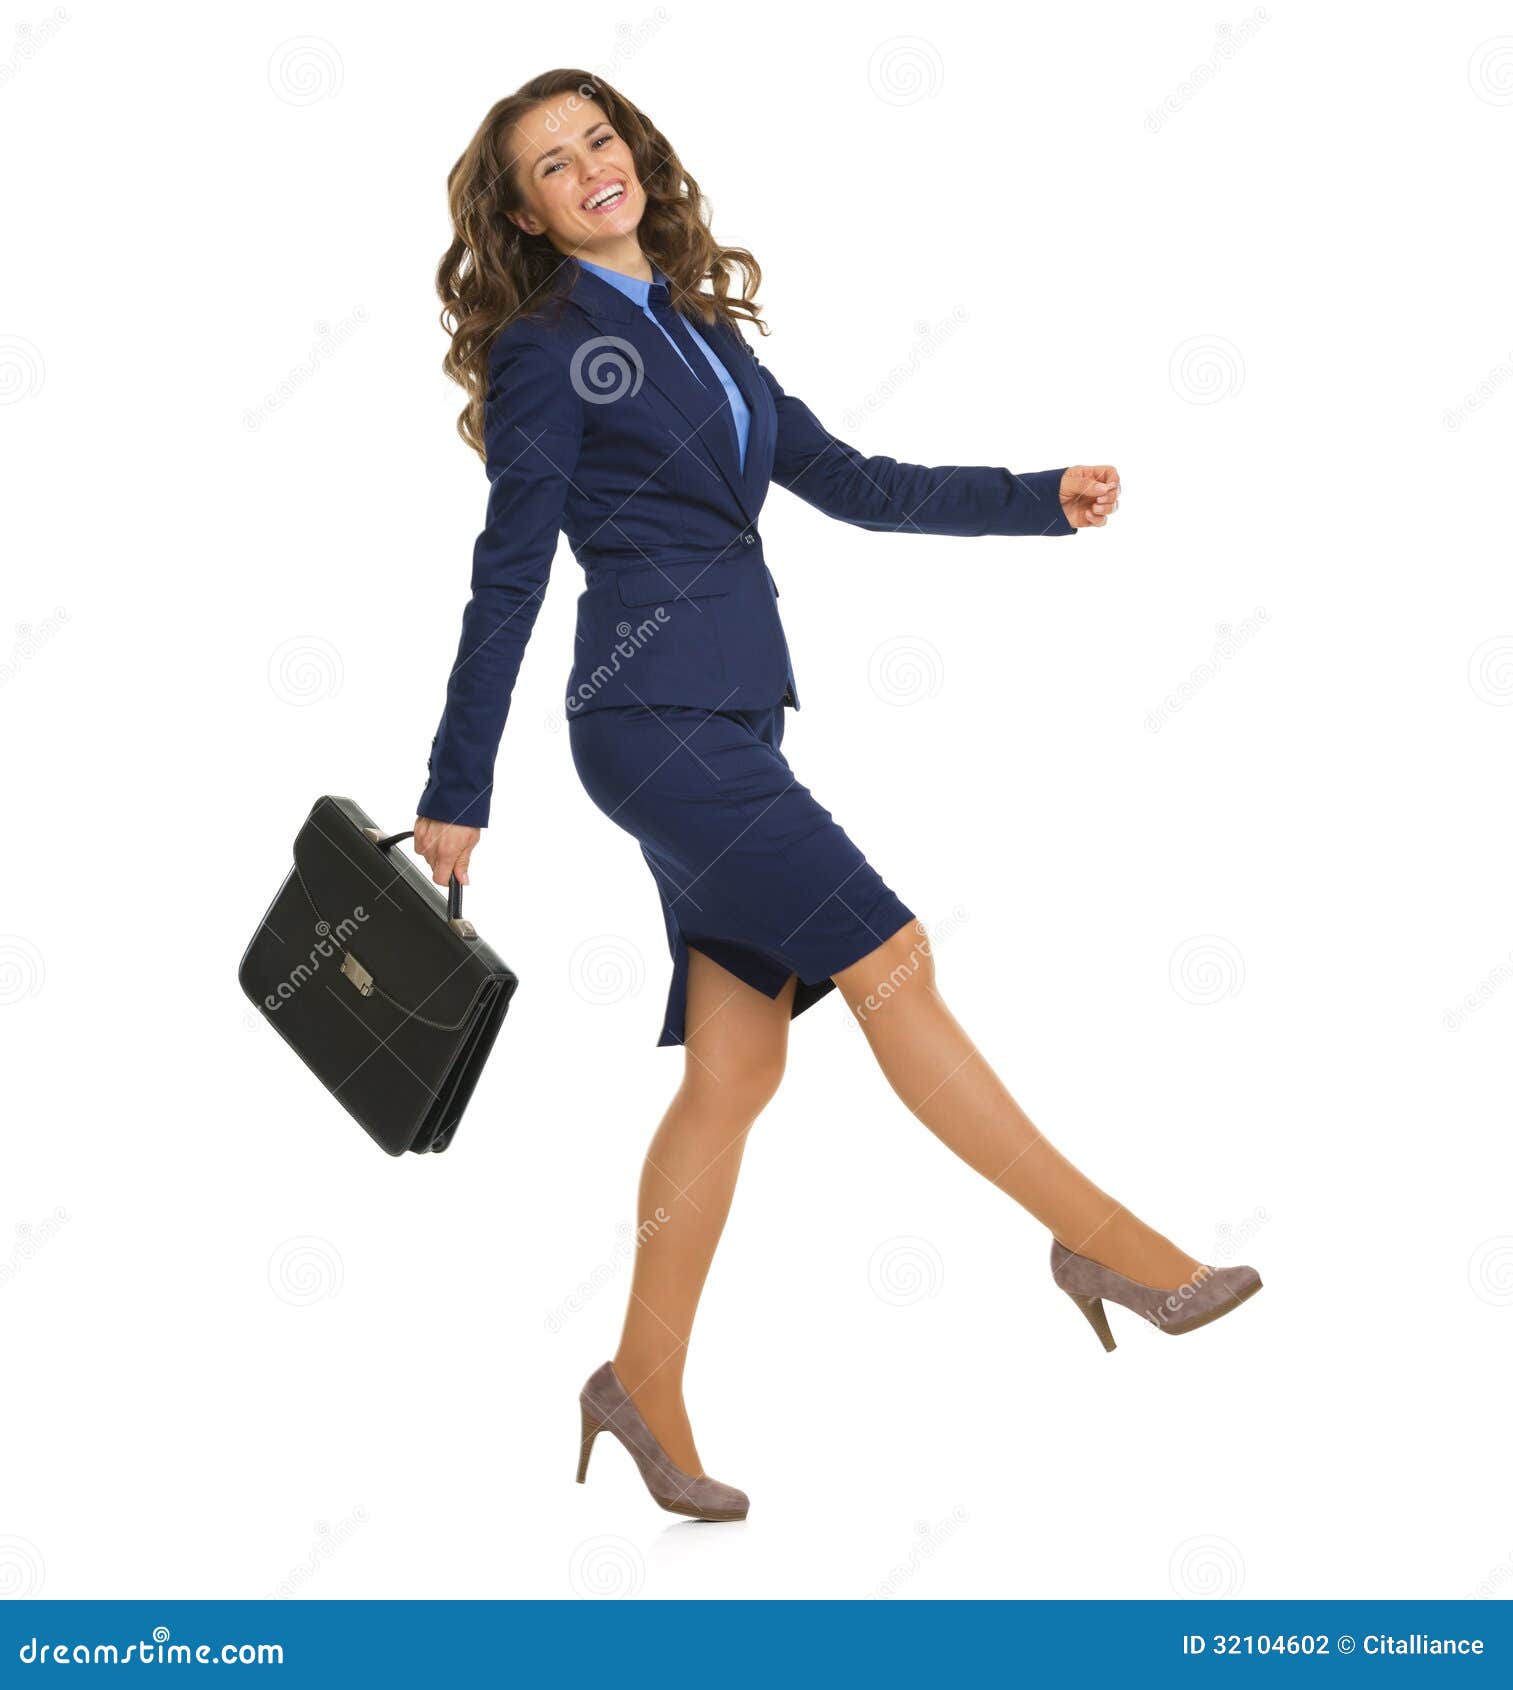 smiling-business-woman-briefcase-cheerfully-going-sideways-full-length-portrait-32104602.jpg